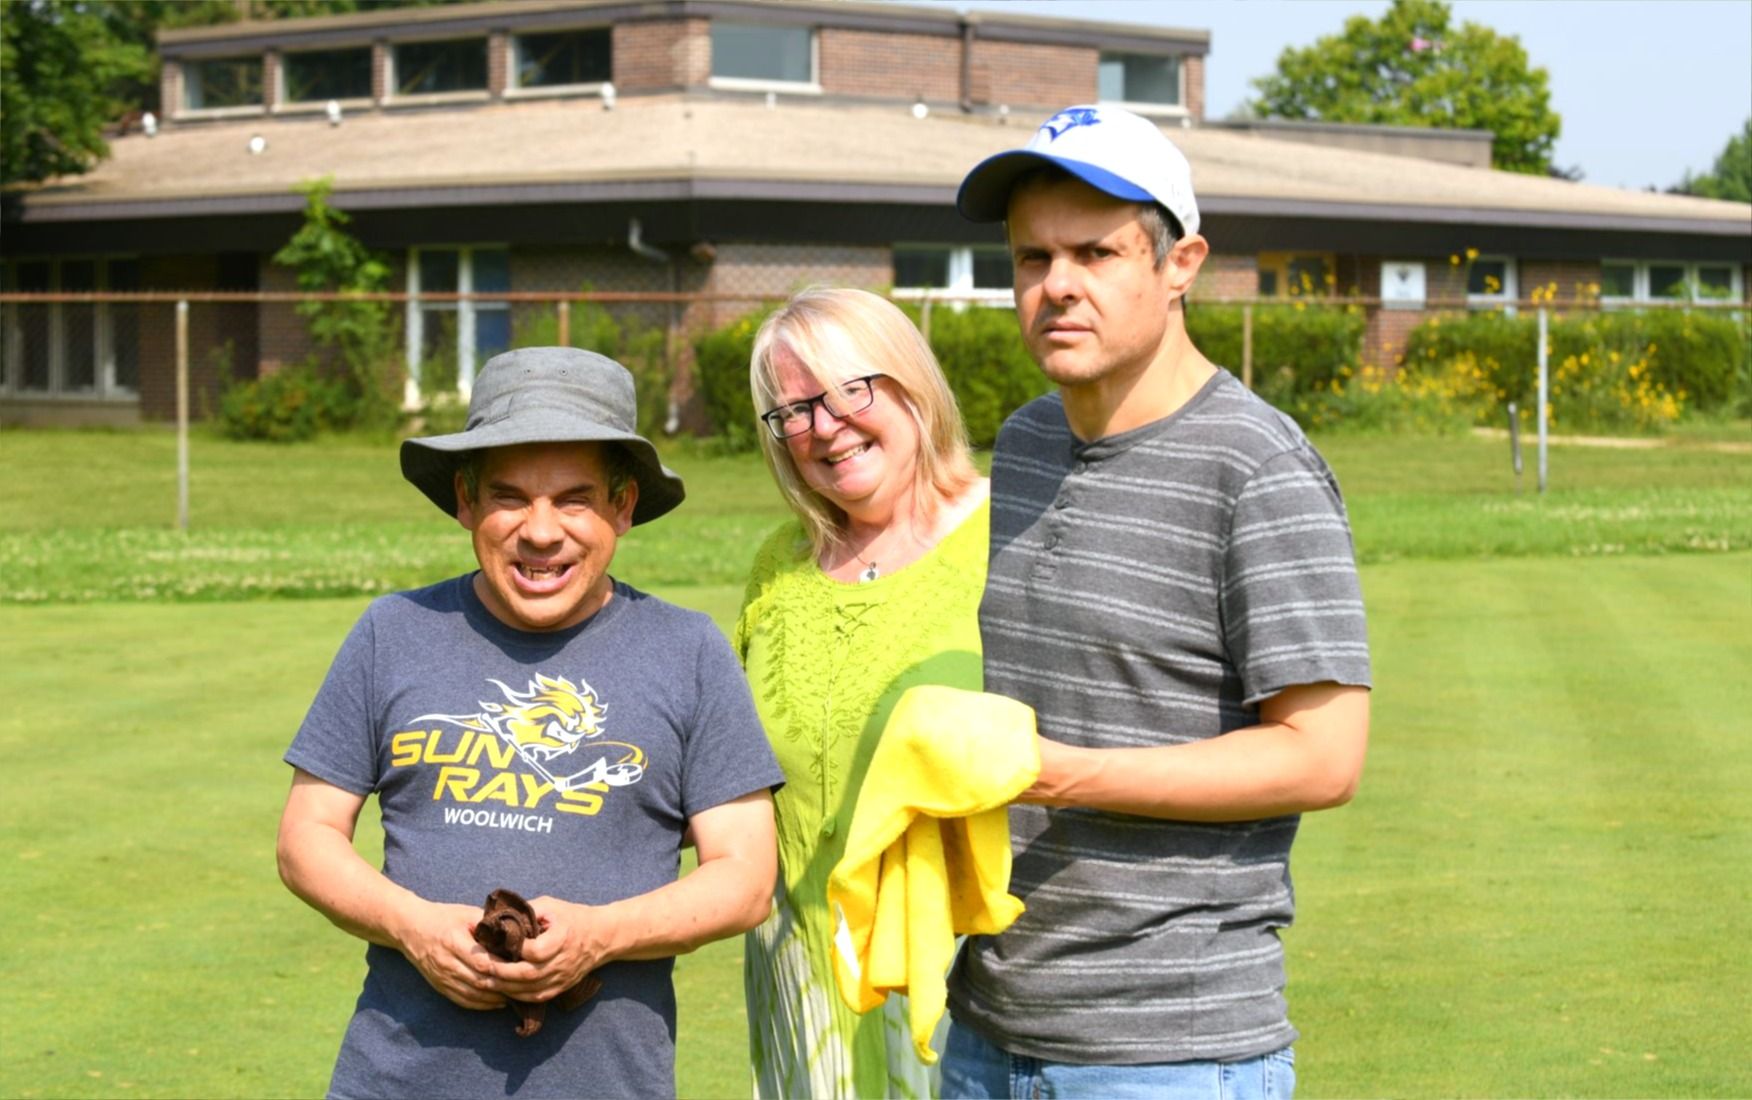 Lawn bowling proves popular with EDCL clients